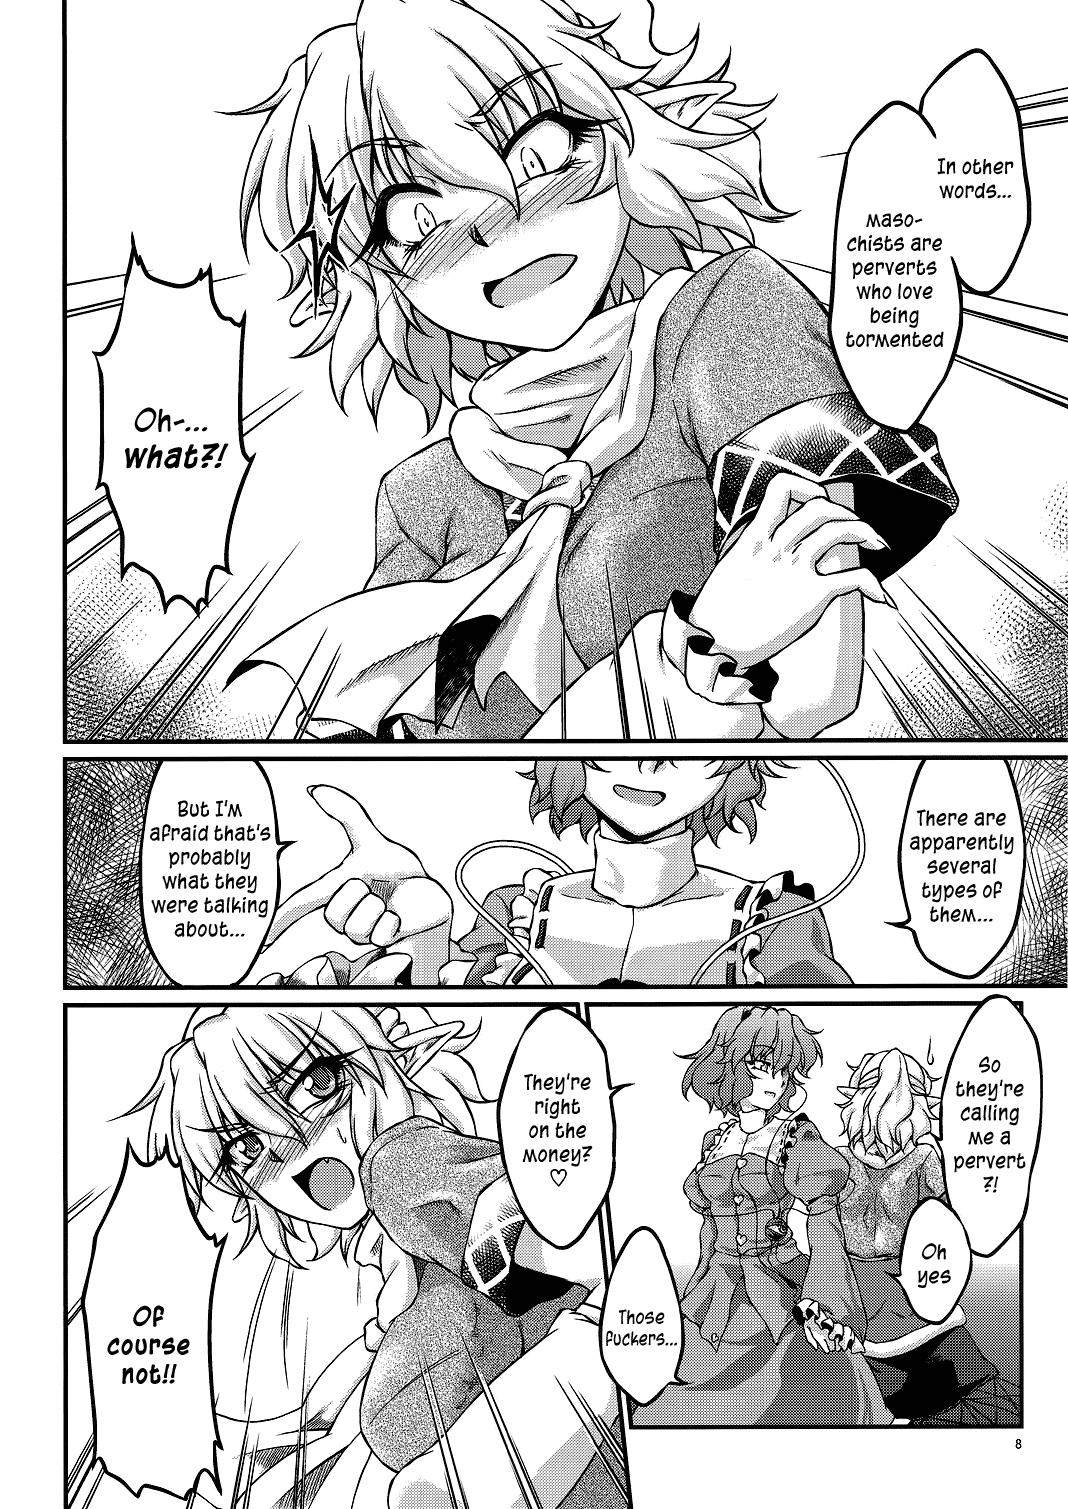 Rope Say the Word - Touhou project Shaved Pussy - Page 7